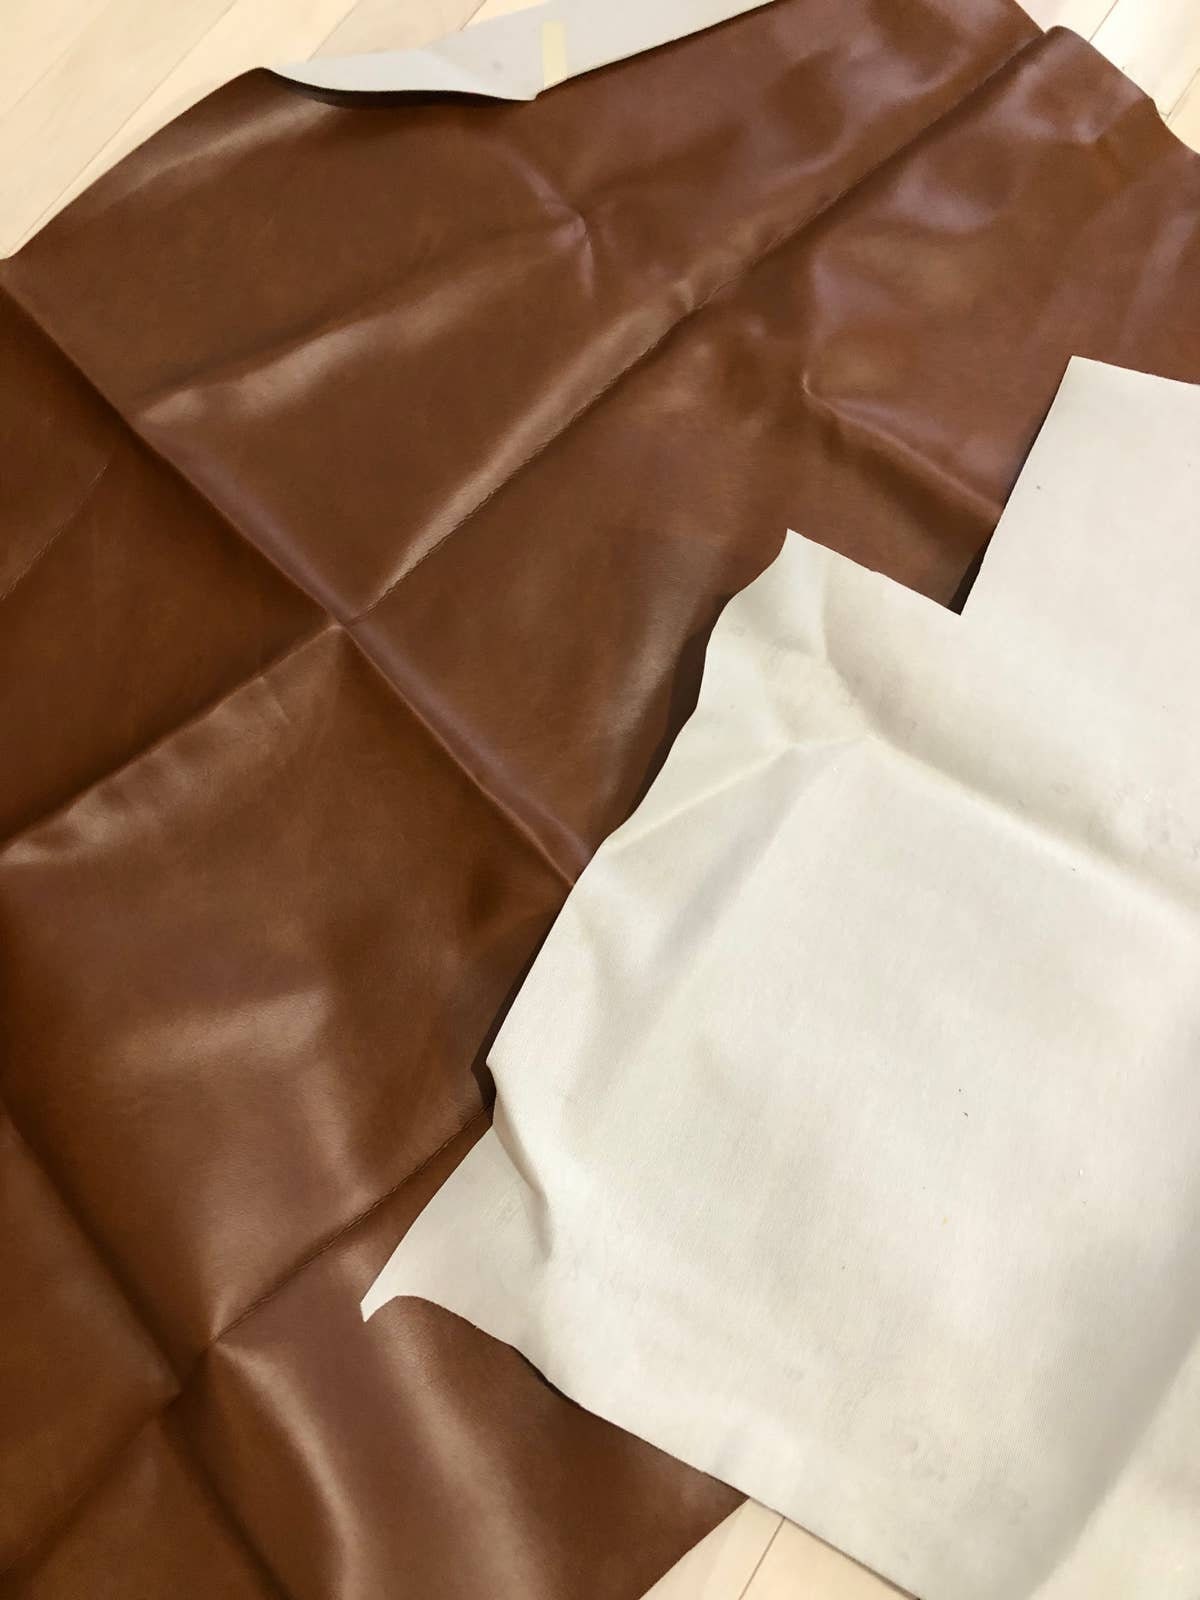 Brown Two Way Stretch Apparel Pleather, Chocolate Matte Faux Leather by  Yard, Mocha Spandex Vinyl Fabric Medium Weight. Soft Touh 